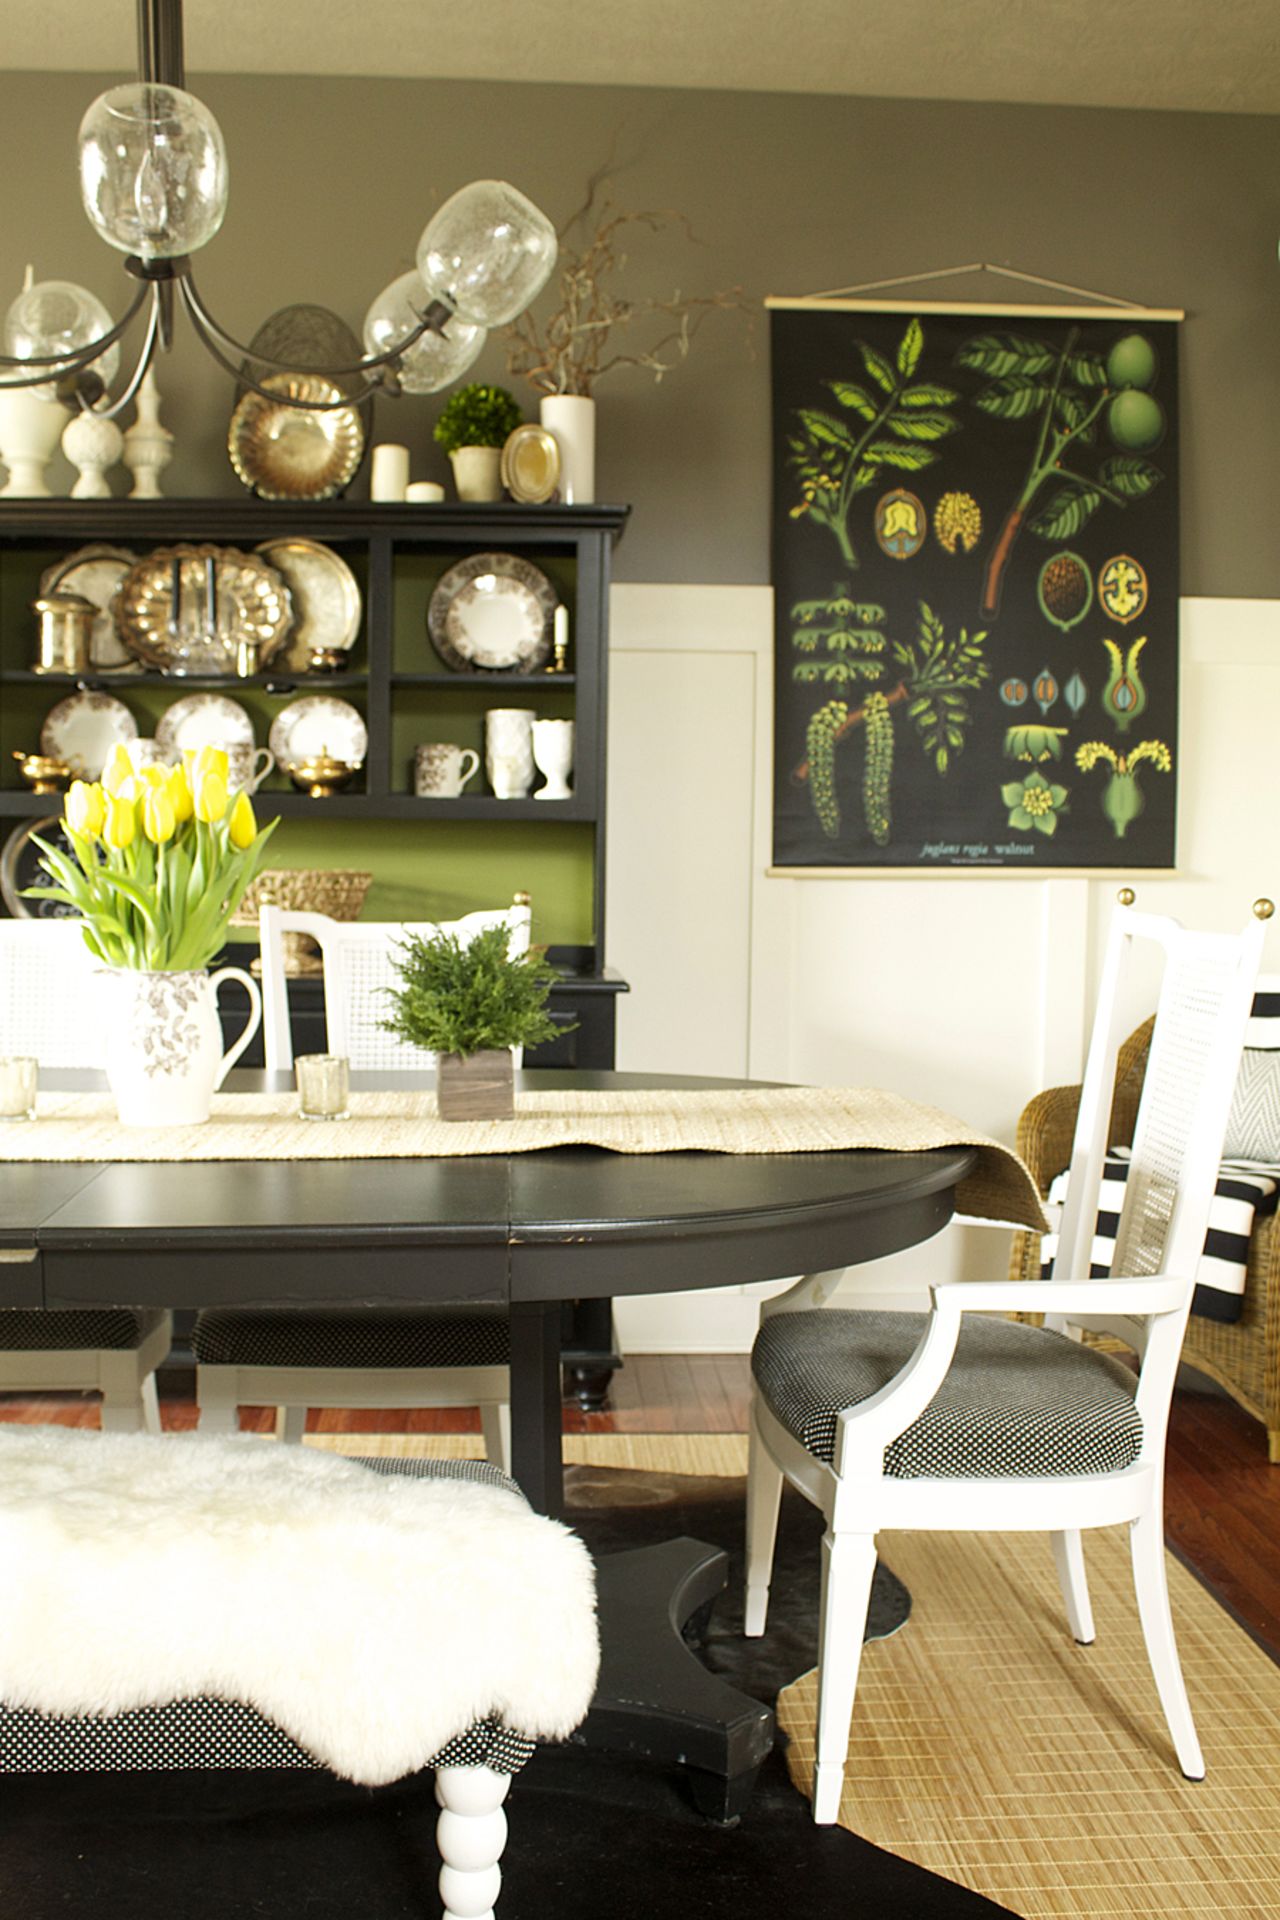 Laurie Jones, a decorator and blogger, incorporates dramatic contrast in her dining room. She uses small touches, like centerpieces, to <a href="http://lauriejoneshome.com/2013/09/23/fall-decorating/" target="_blank" target="_blank">update the room as the seasons change</a>.